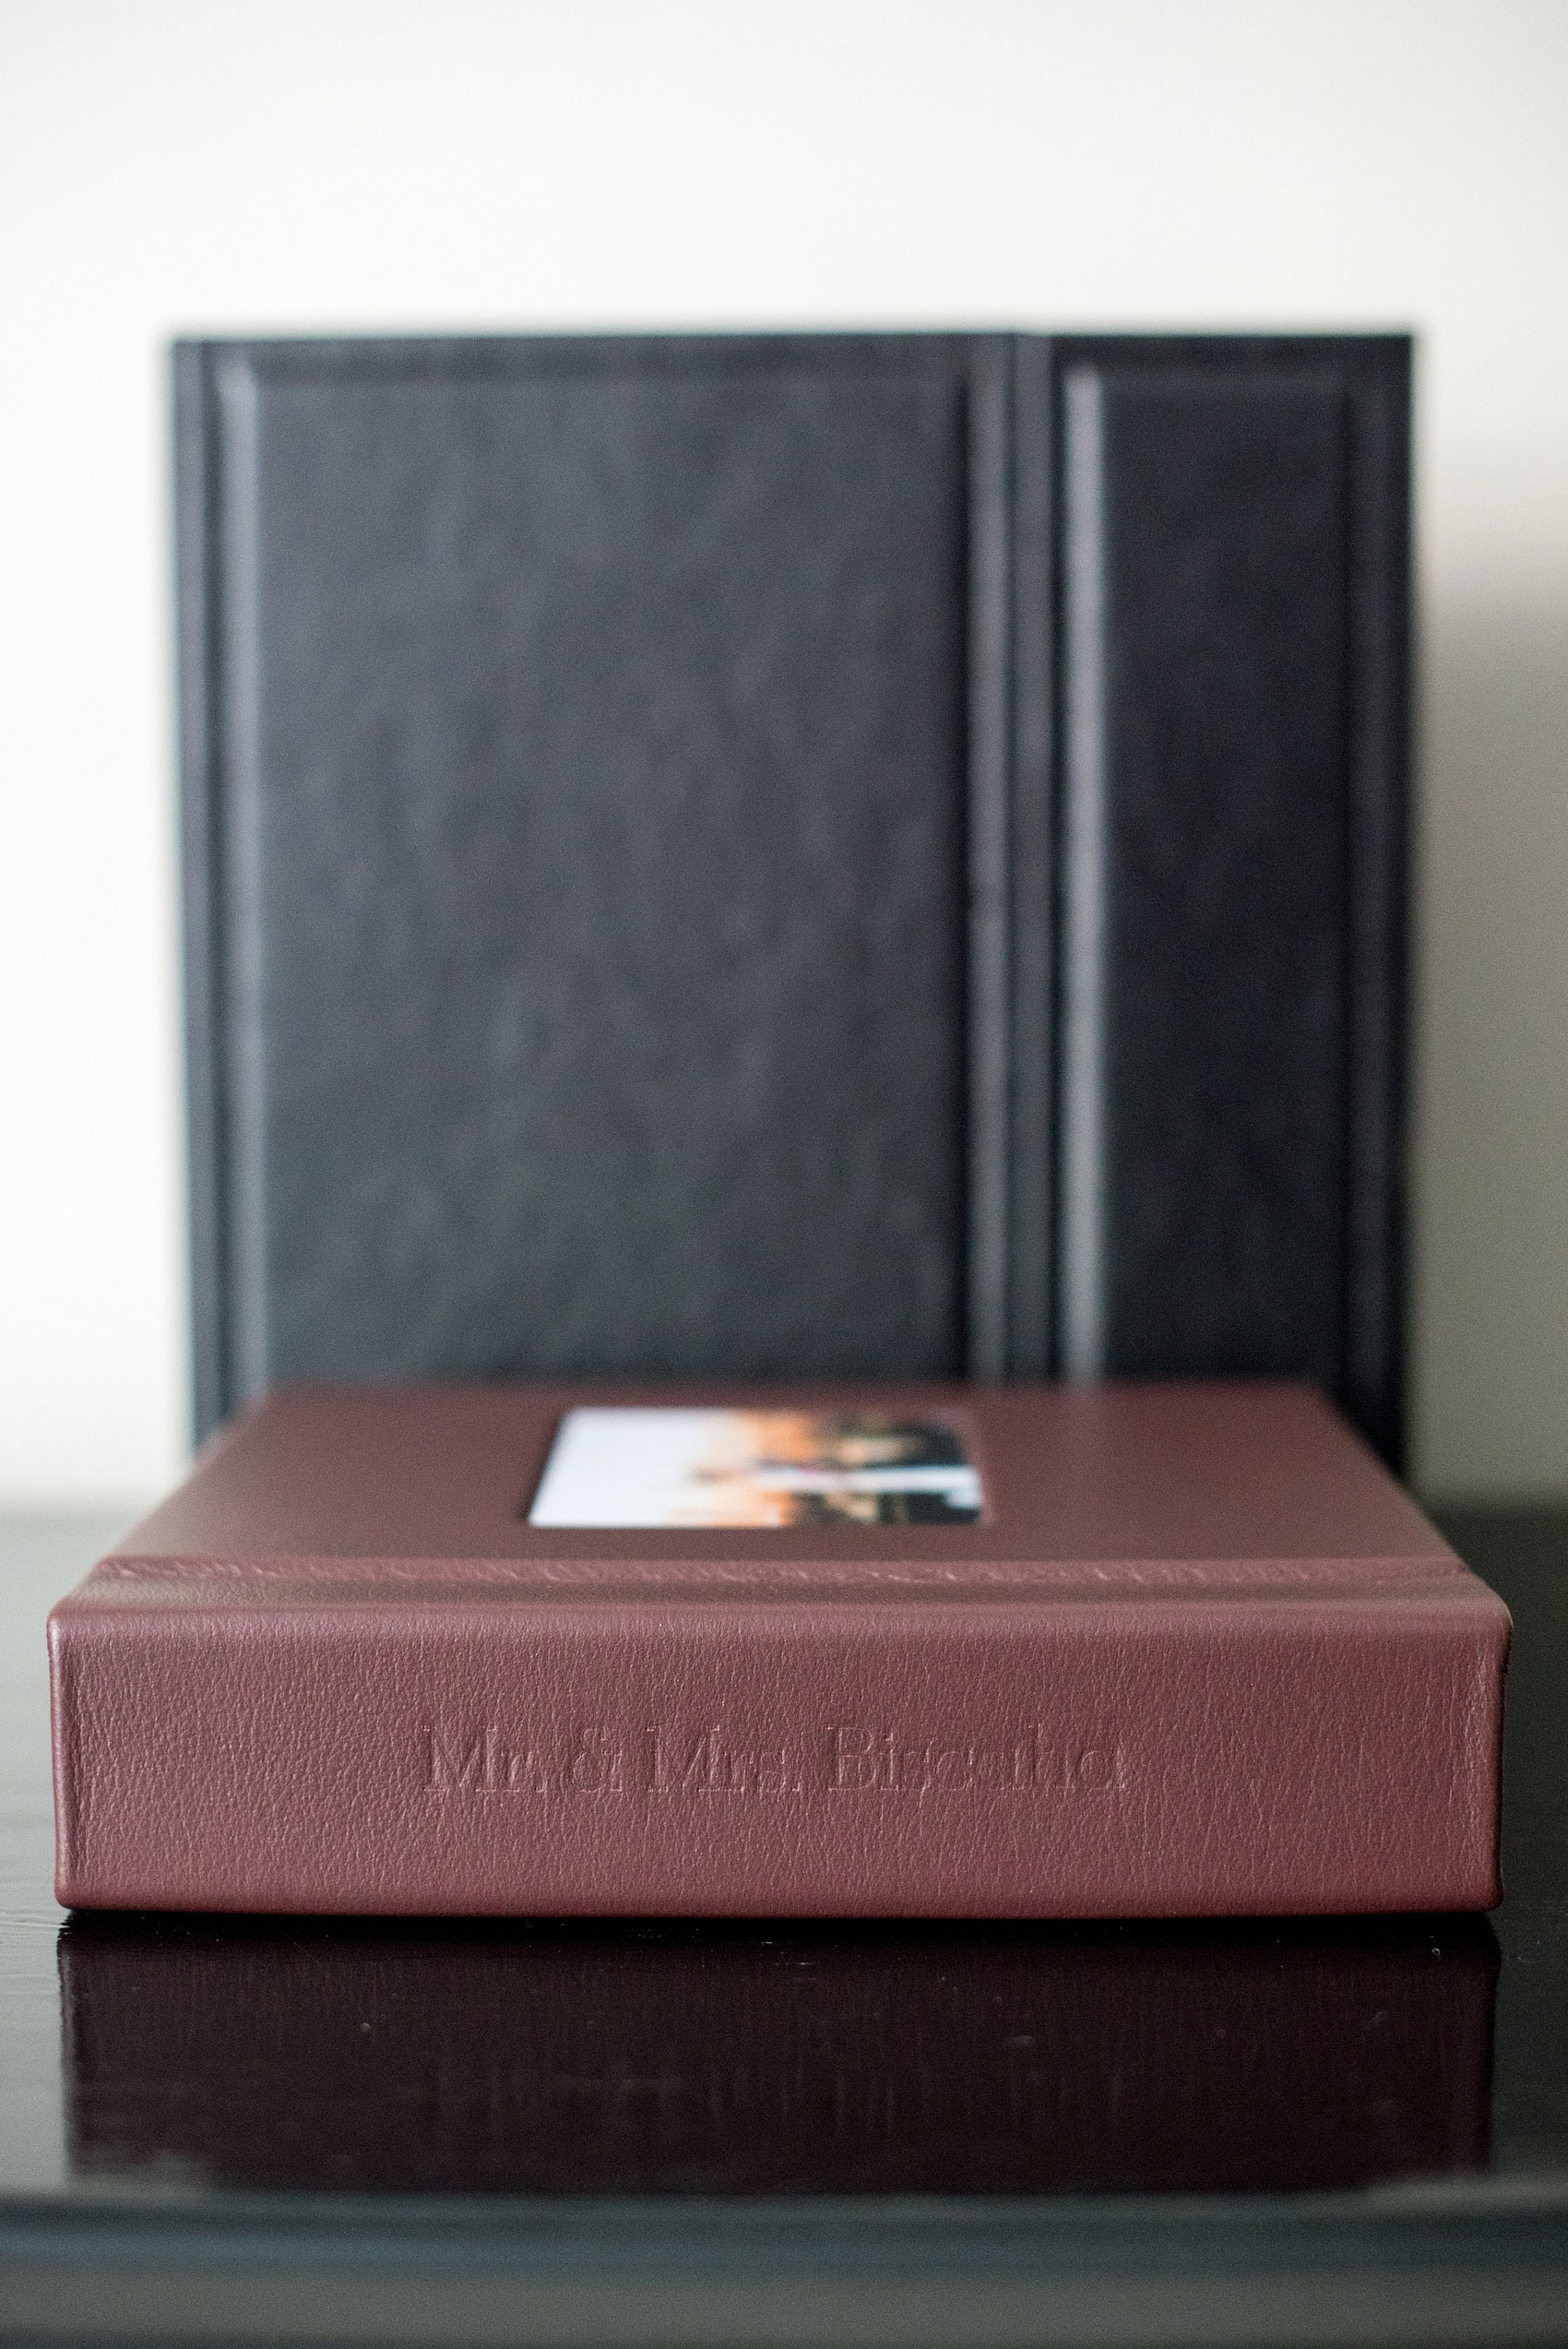 Mikkel Paige Photography photos of a fine art leather Madera wedding album in Oxblood. 8x8" Parent album with inset cover photo and spine debossing.